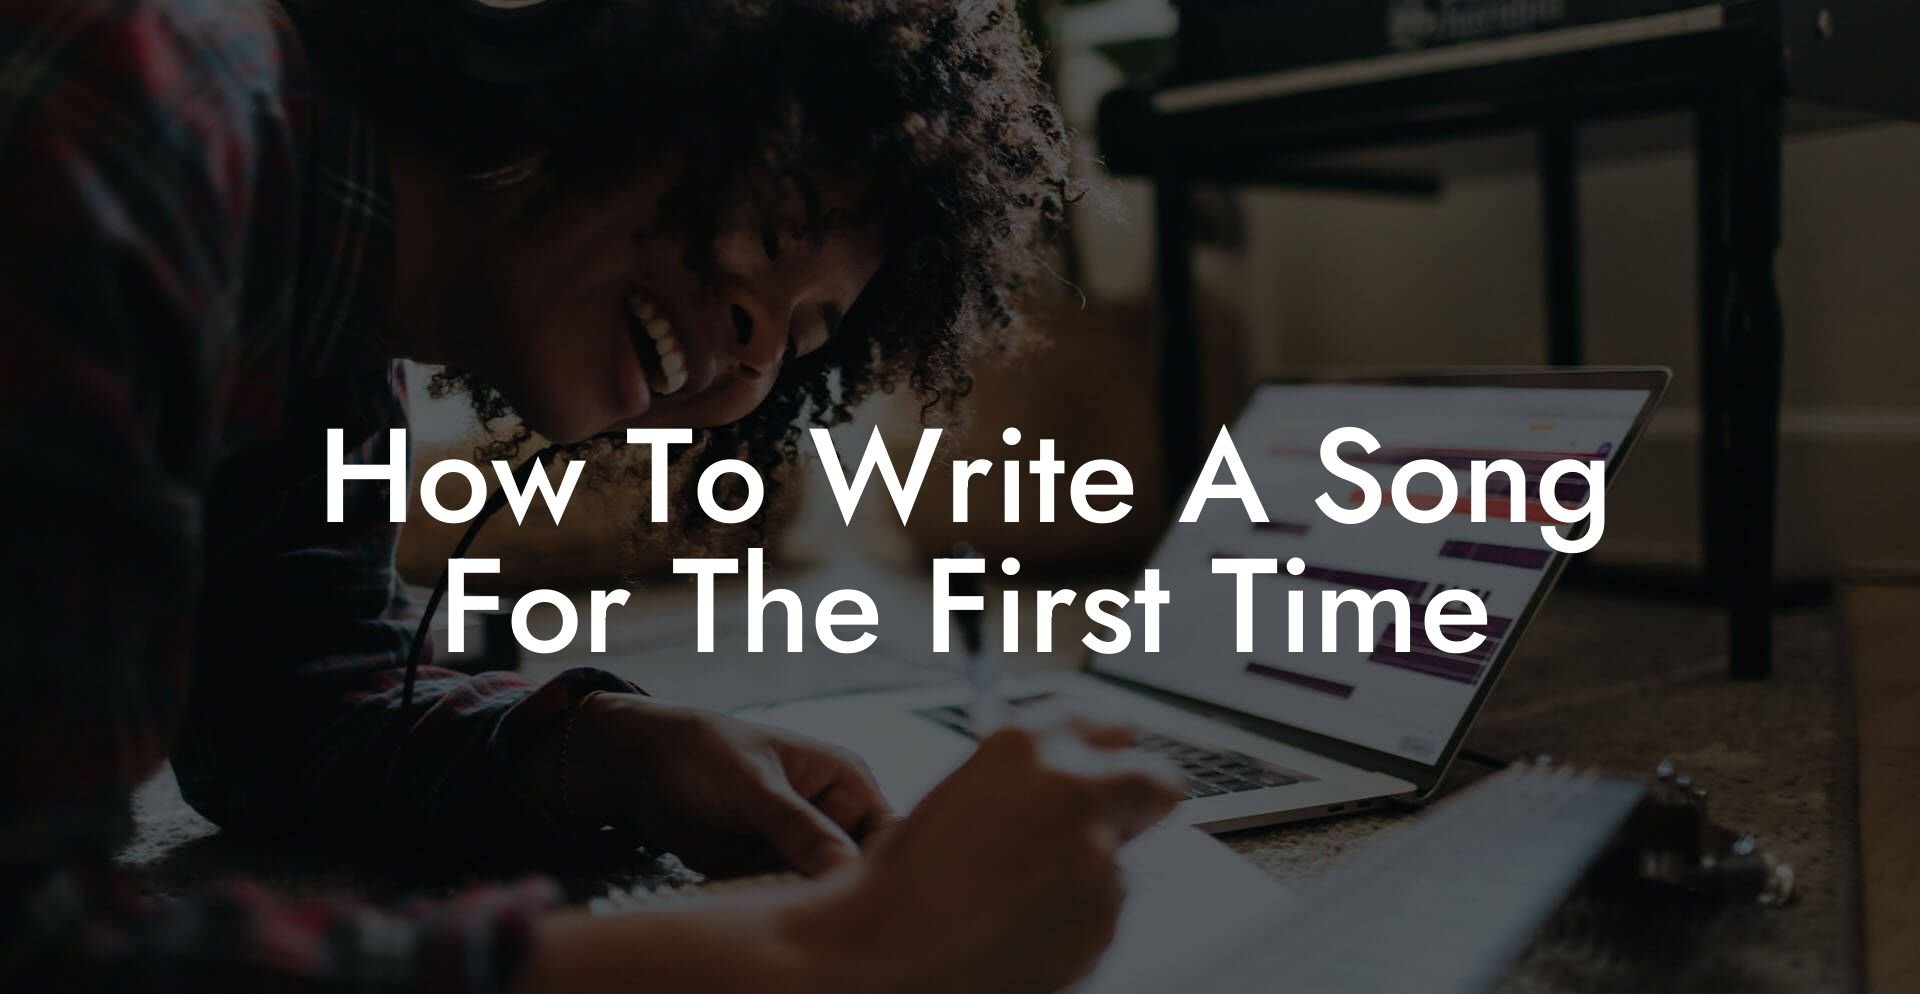 how to write a song for the first time lyric assistant